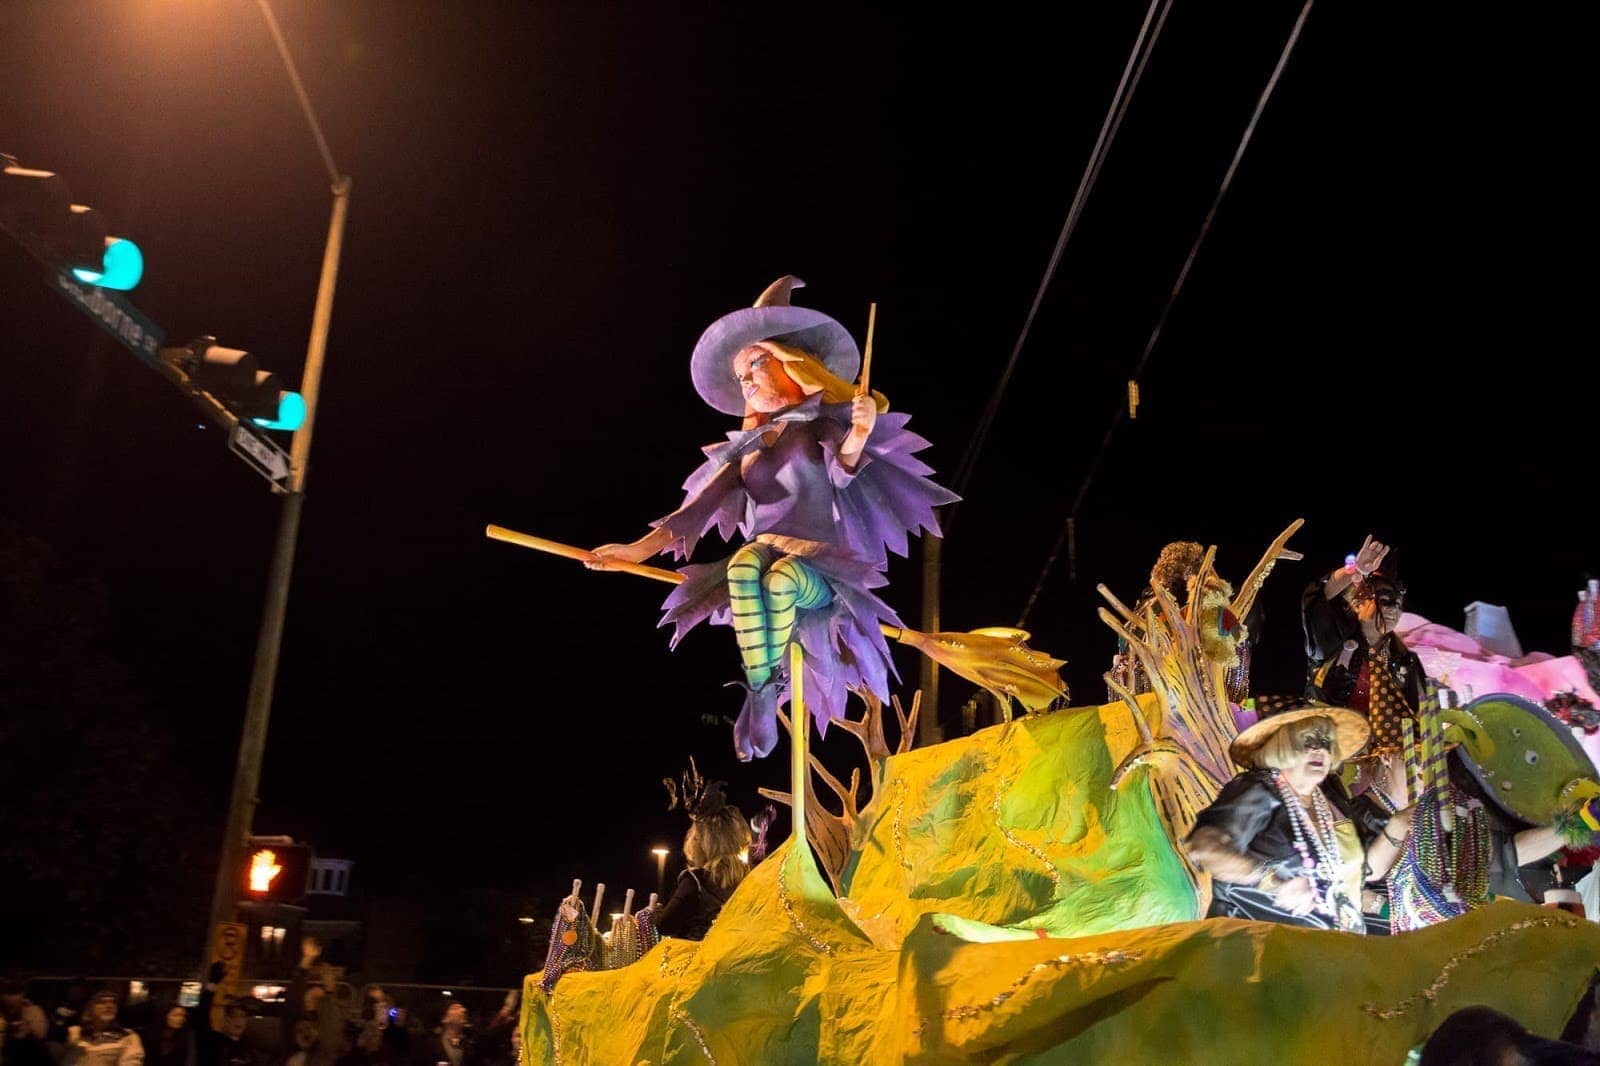 Mardi Gras Mobile by Laurence Norah